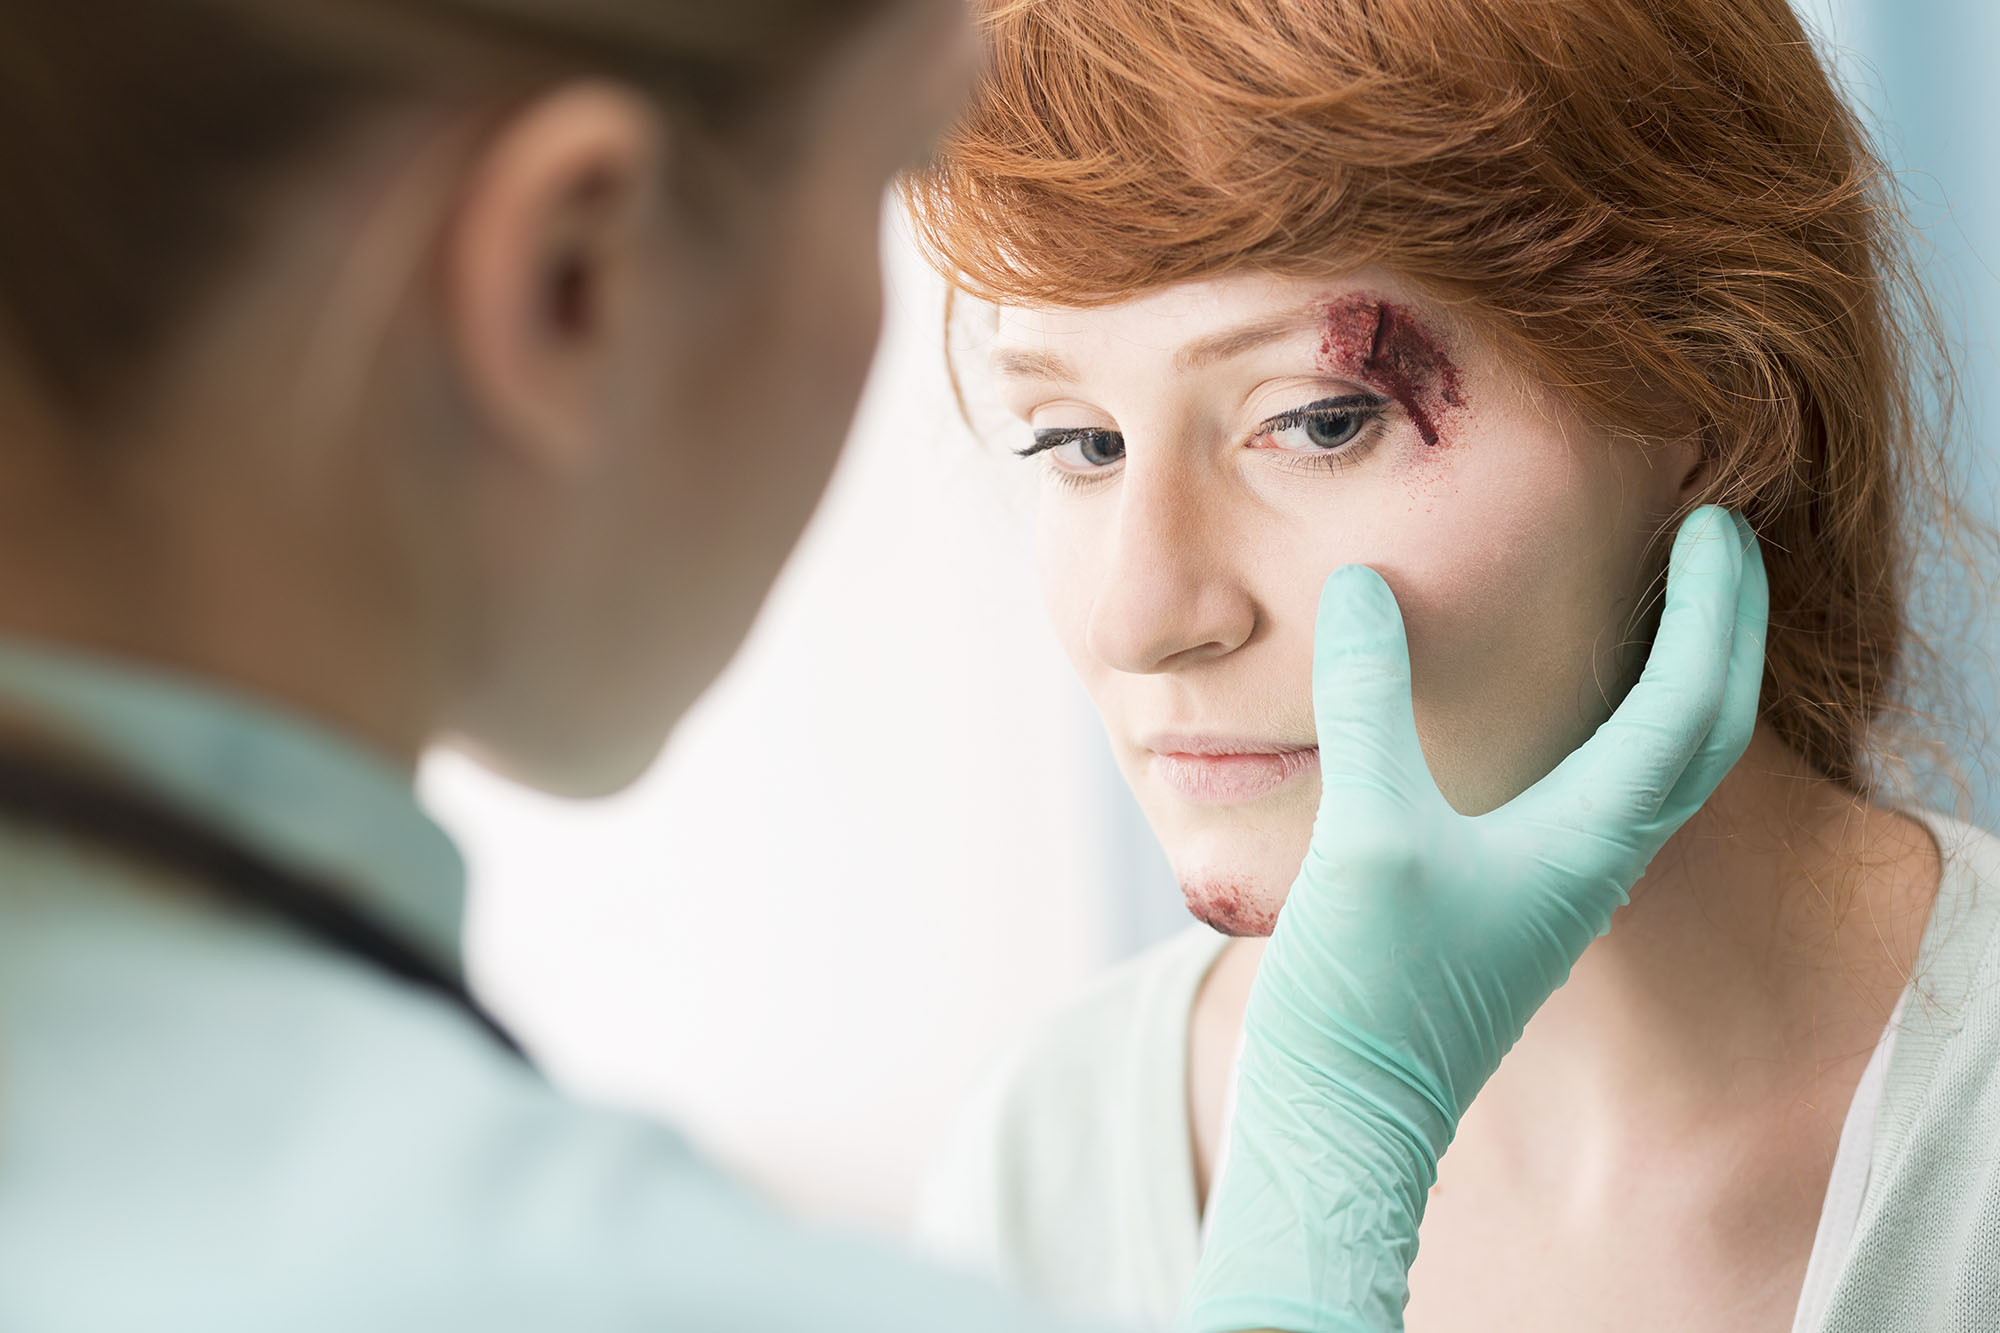 facial eye injury compensation claim solicitors Wakefield